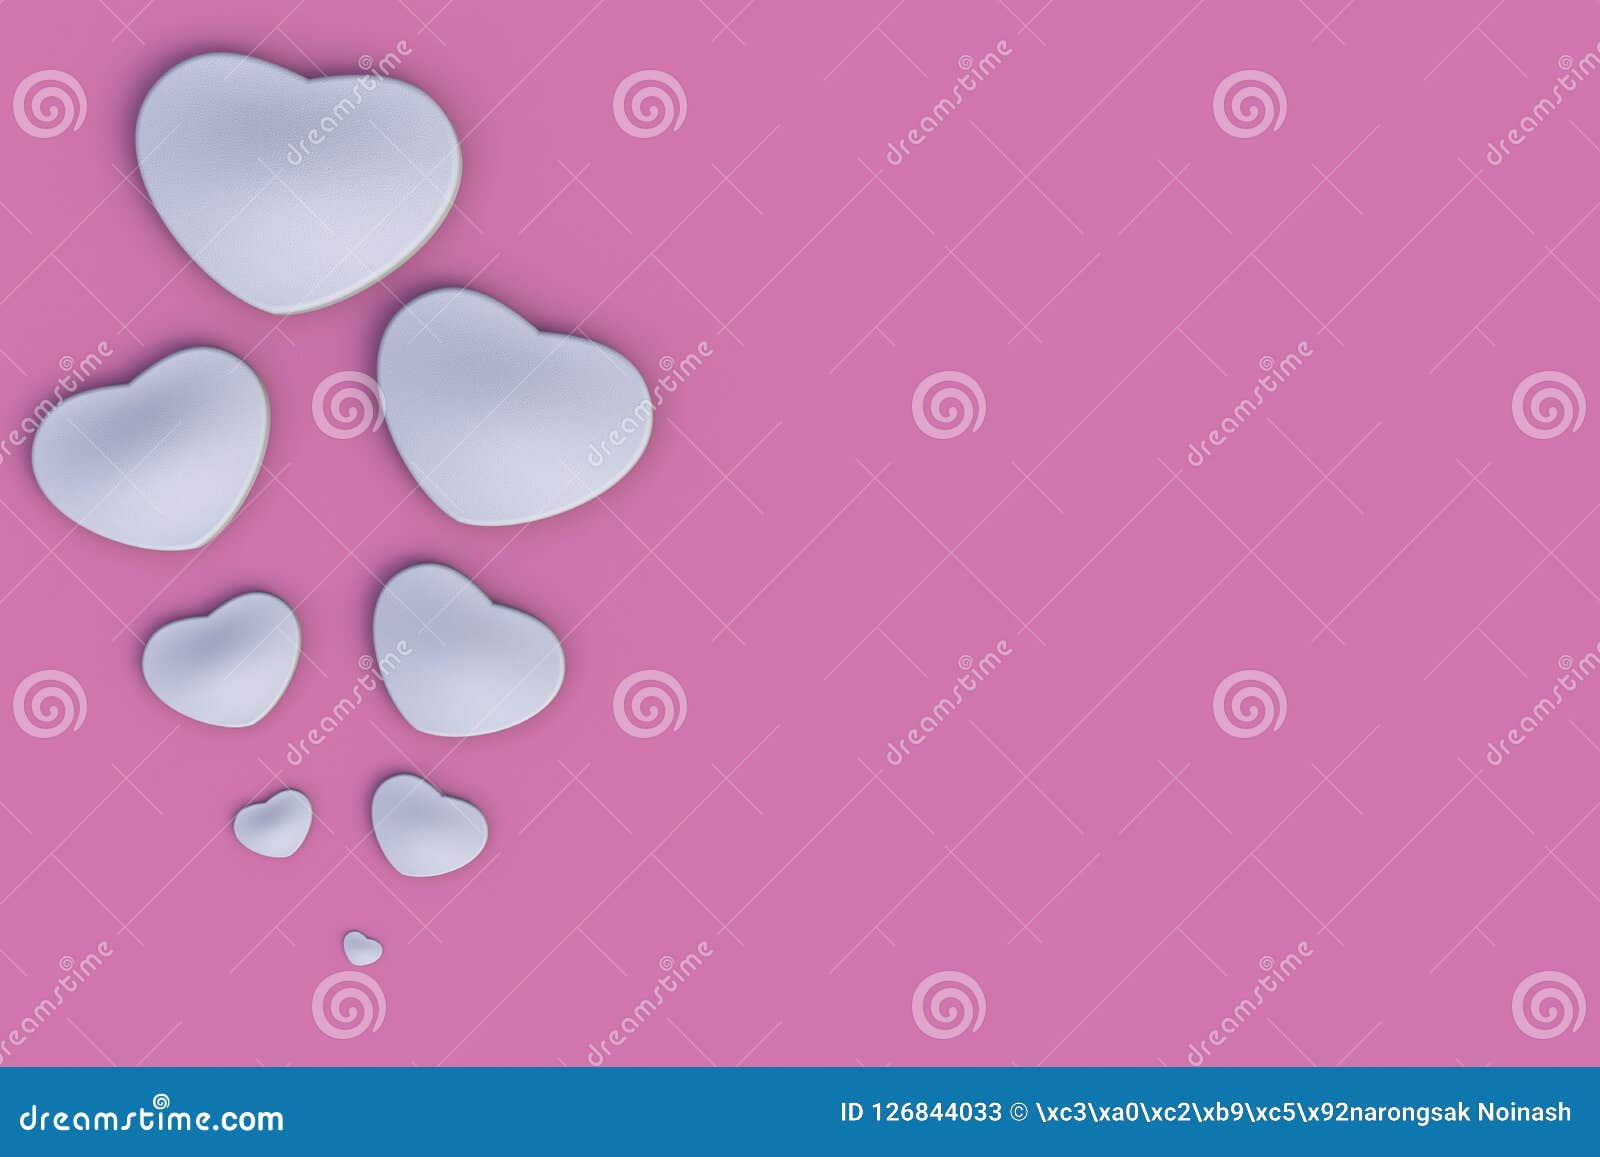 Valentine Day Background with White Hearts. Stock Illustration ...